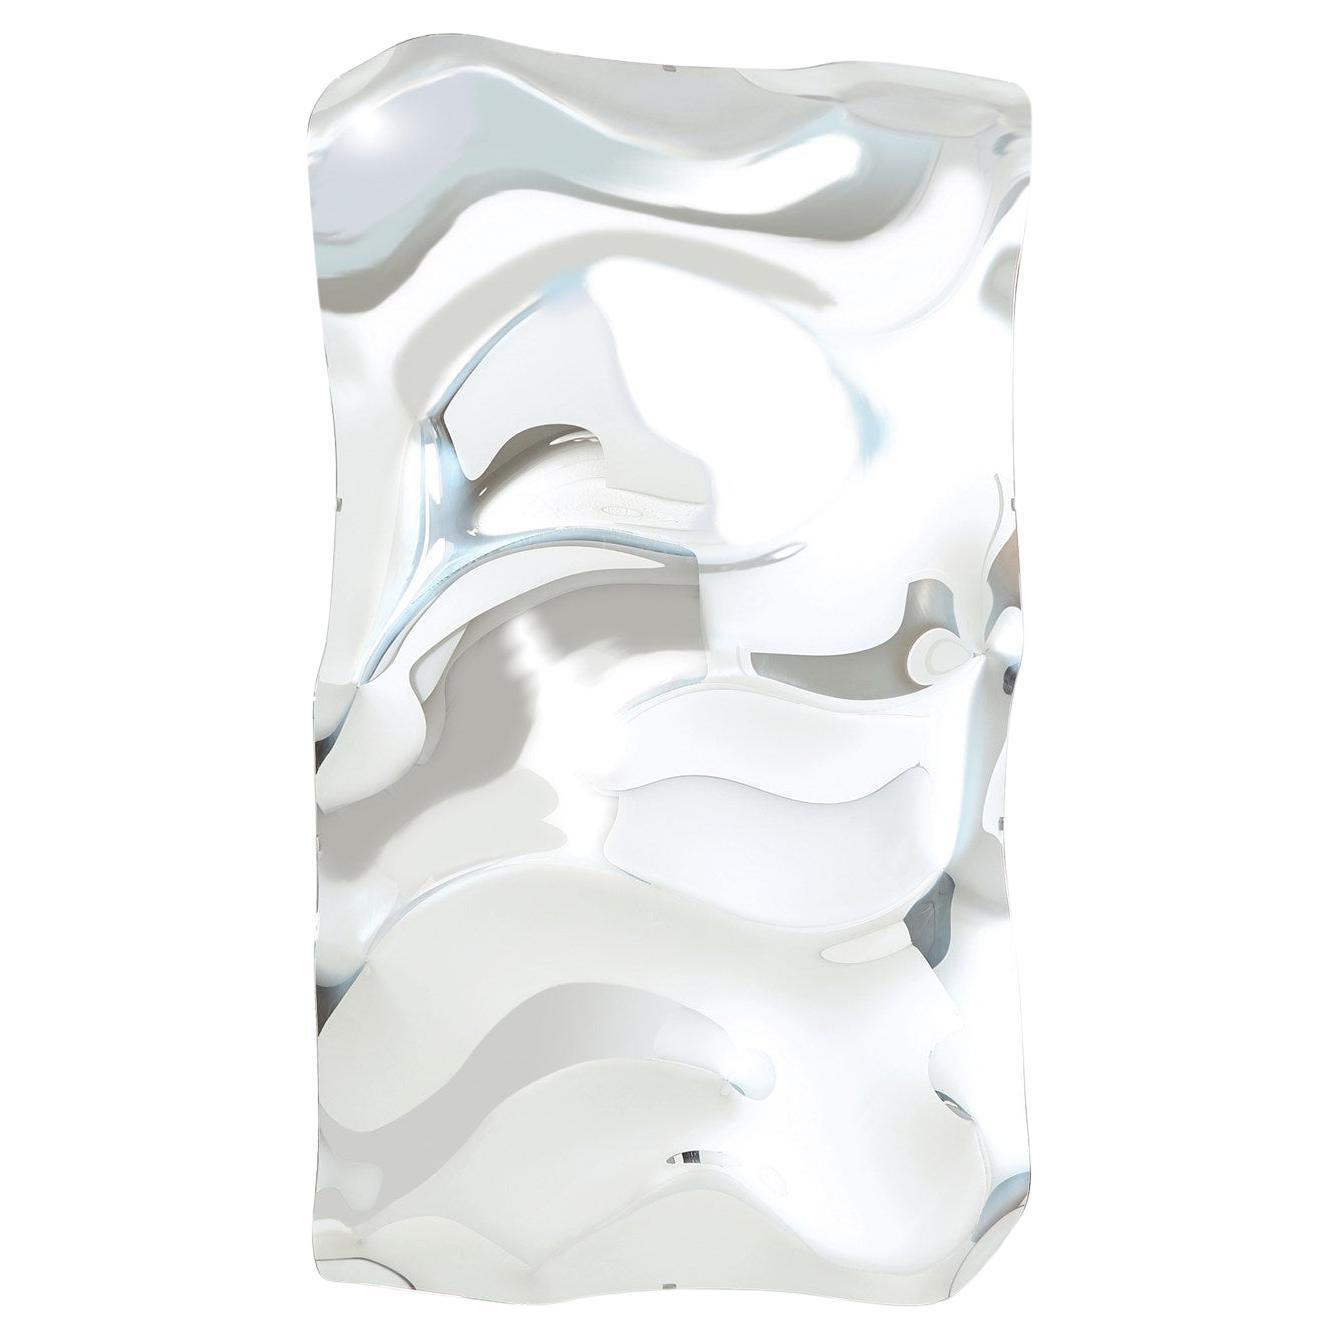 A striking and sculptural hand-blown glass floor mirror, a breathtaking fusion of artistry and functionality. This exceptional piece boasts a uniquely modern design that seamlessly merges style with utility. Serving as both a captivating wall art